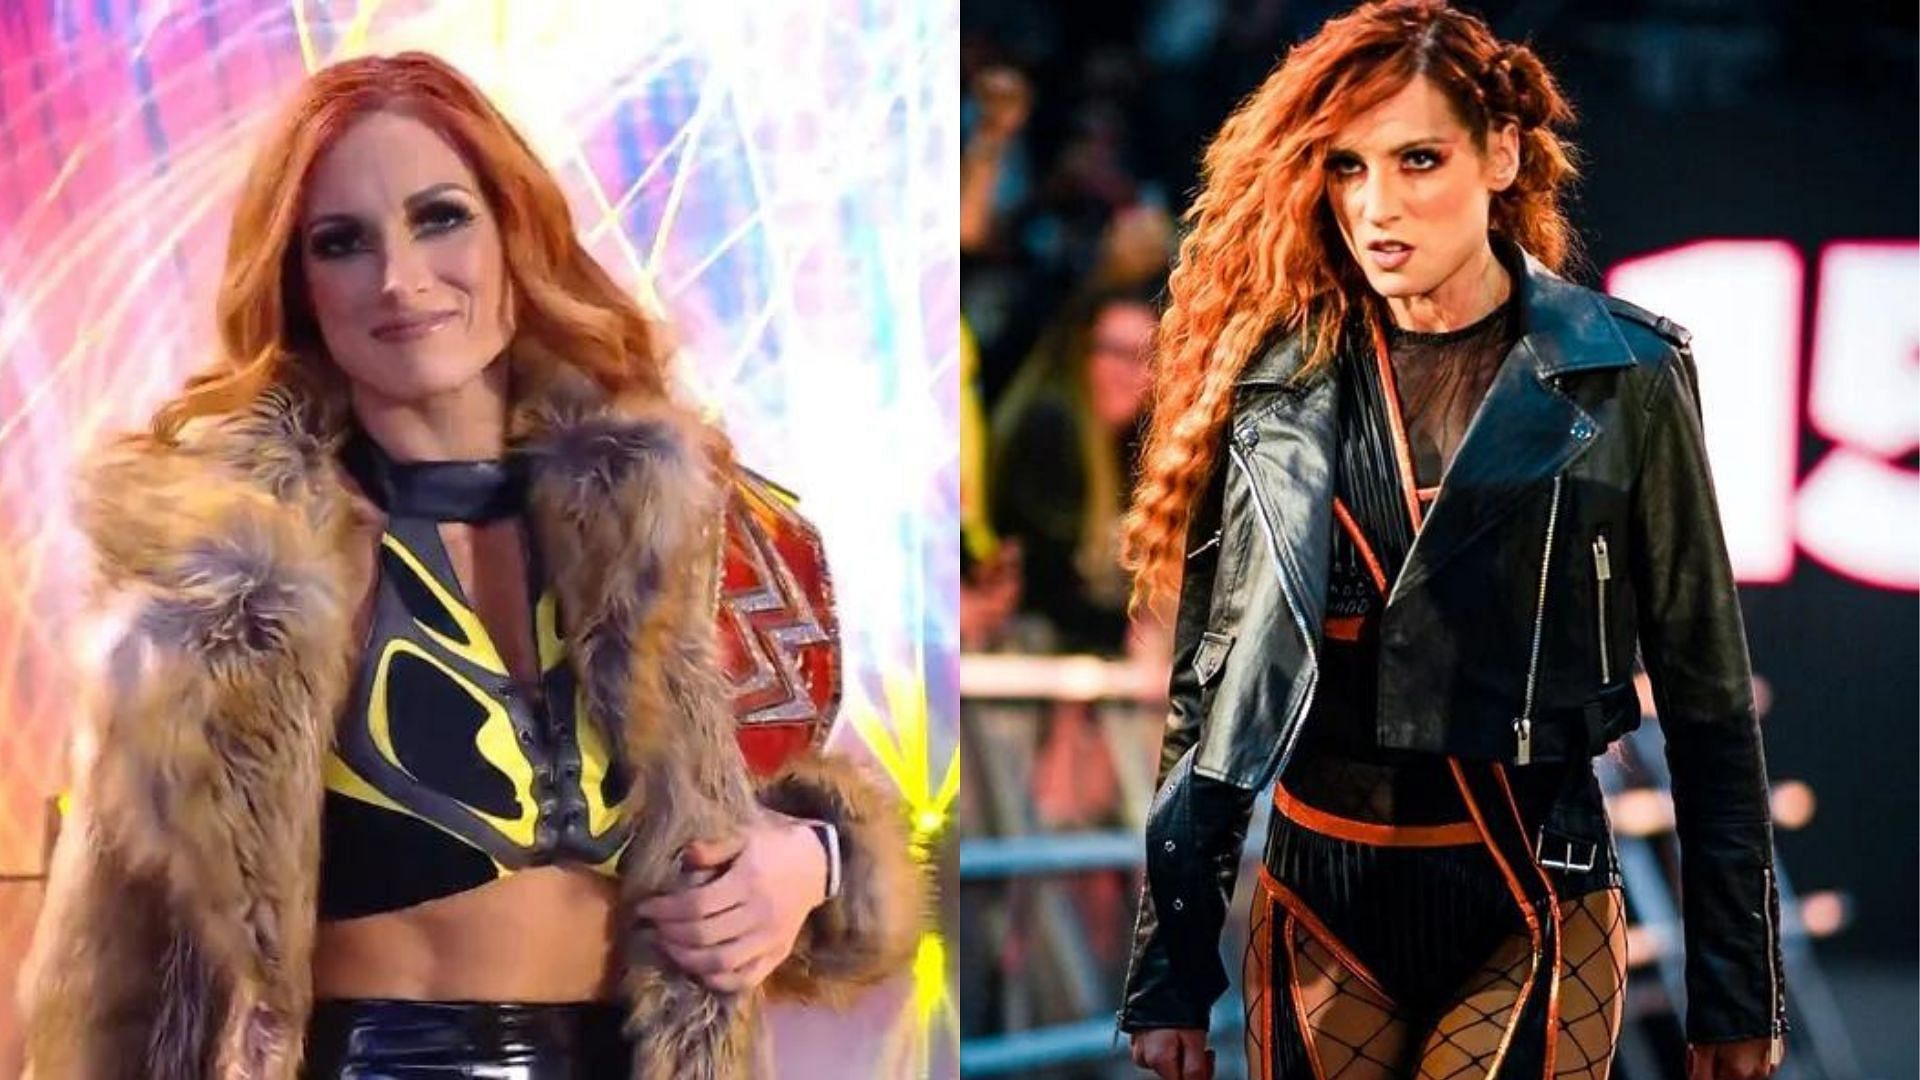 Becky Lynch is feuding with Trish Stratus